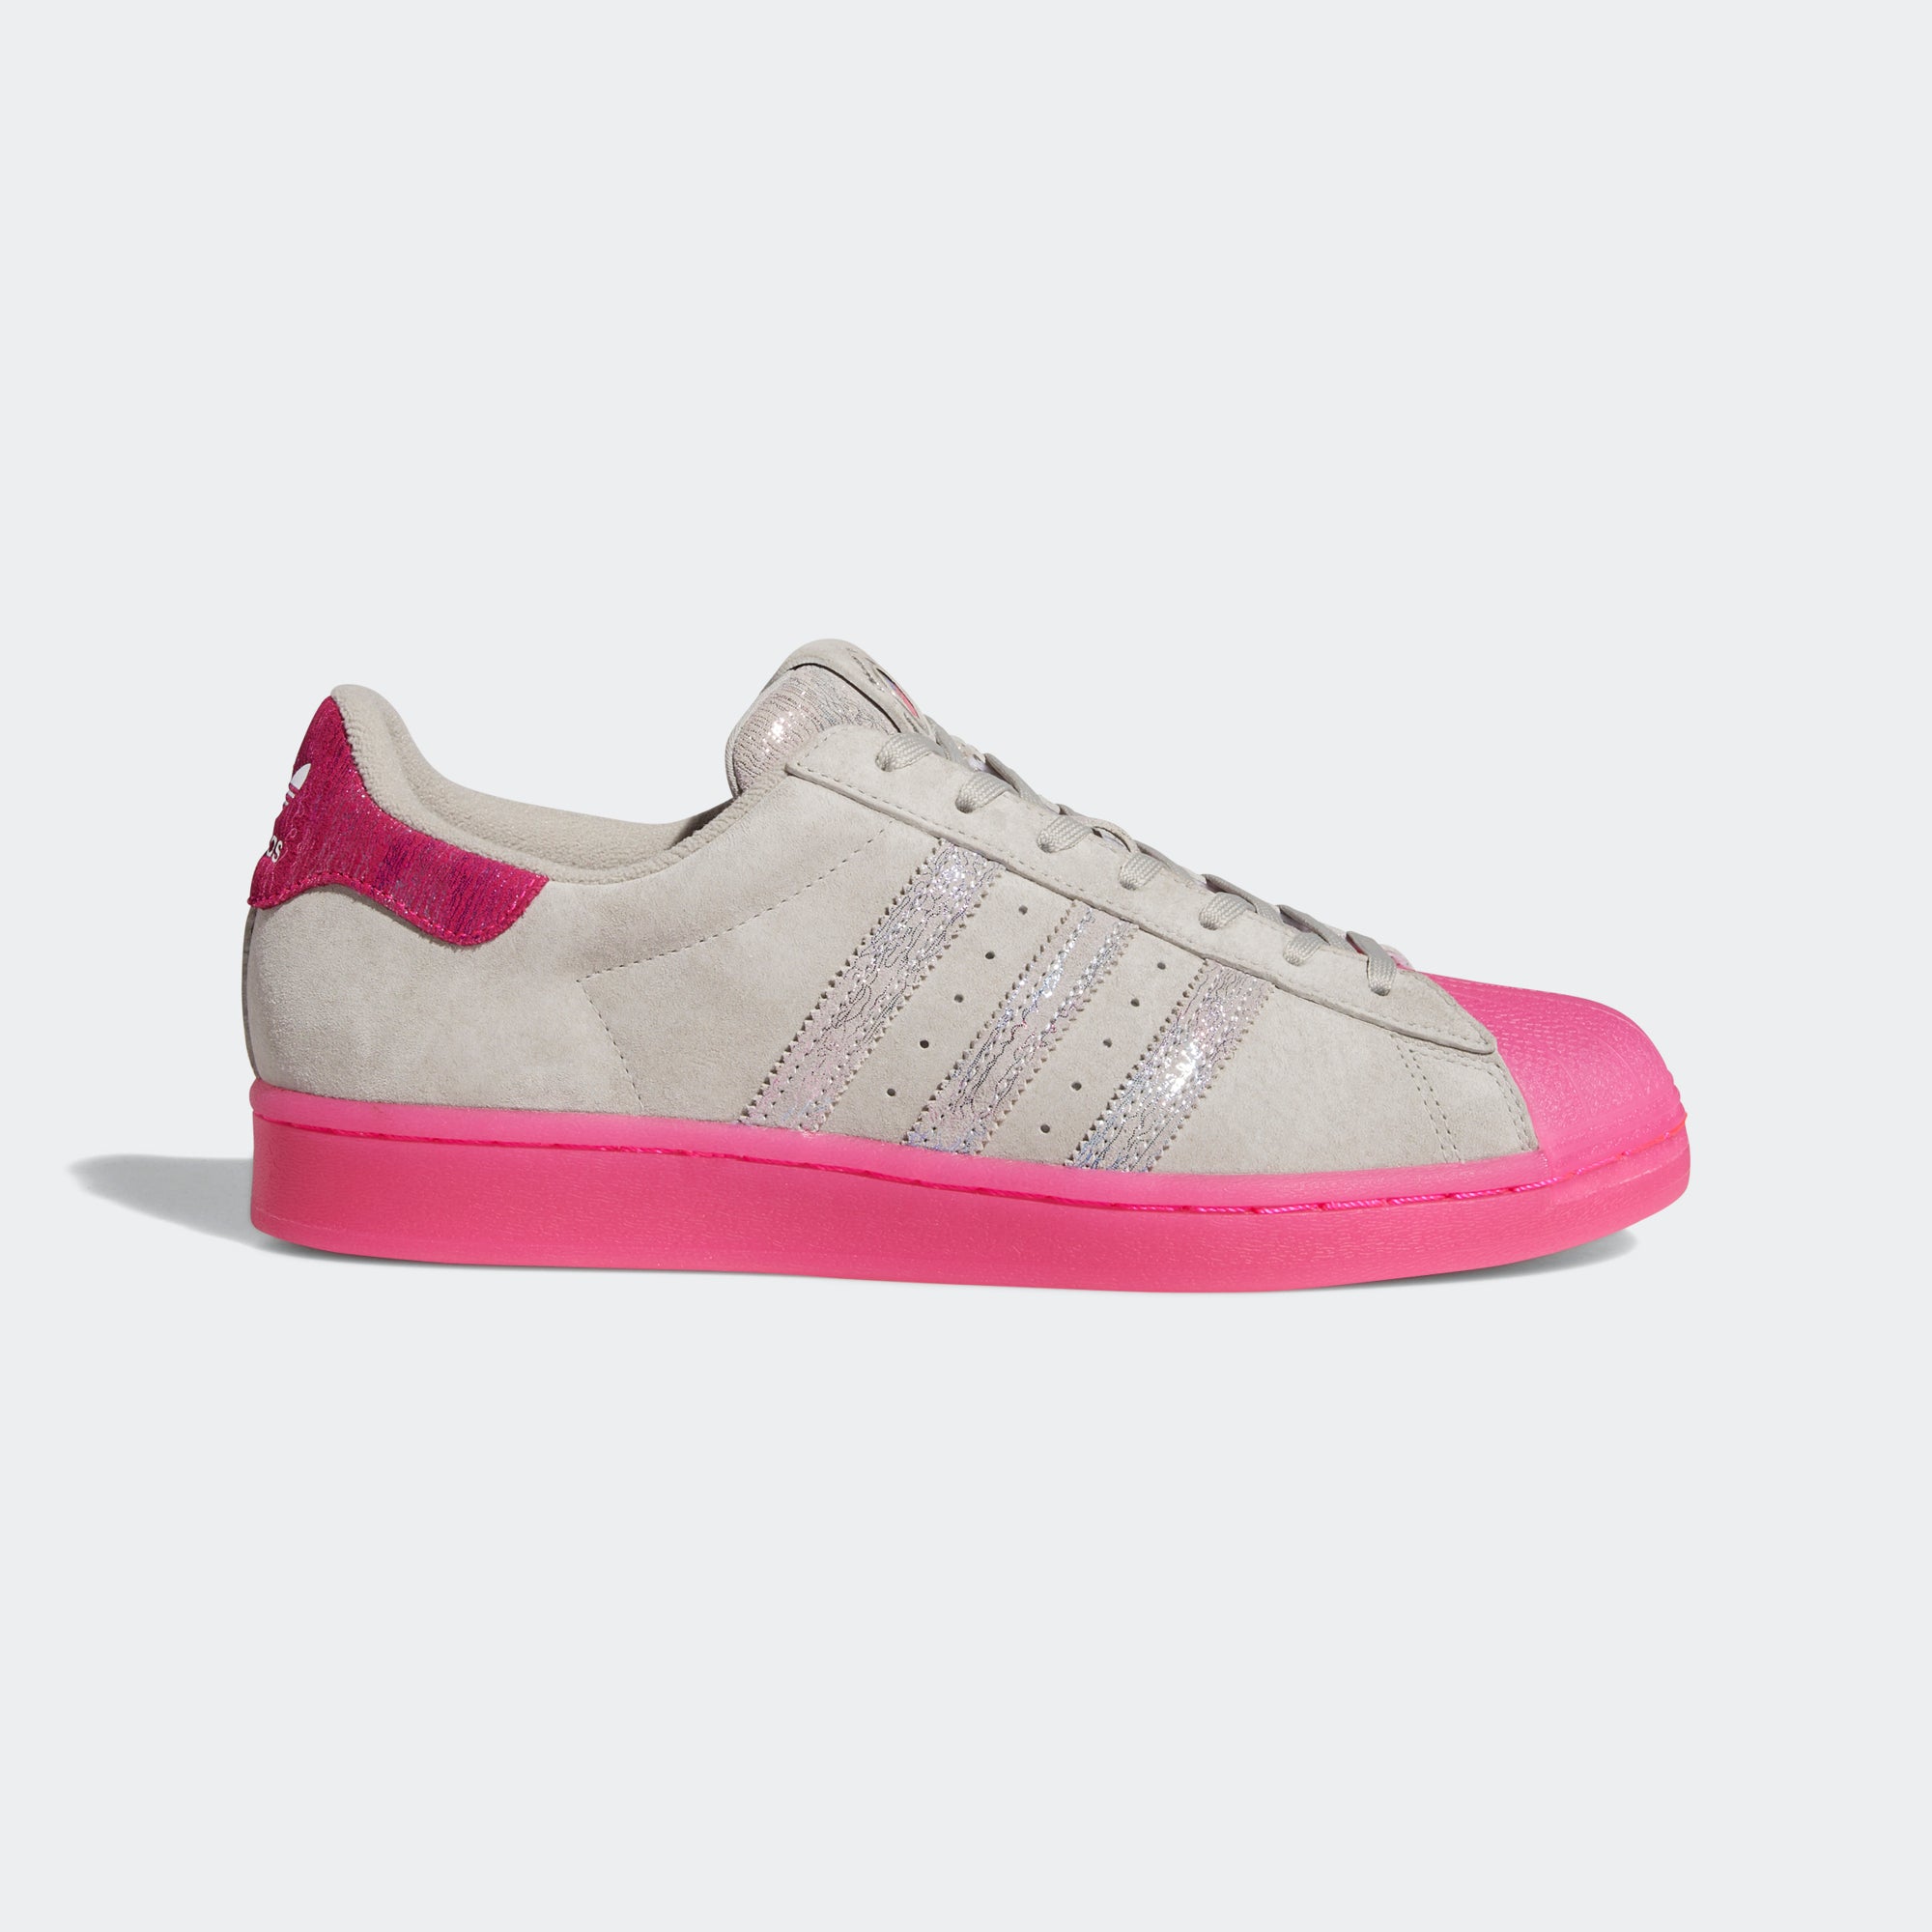 adidas Chicago Superstar Shoes Metal Grey Chicago City Sports